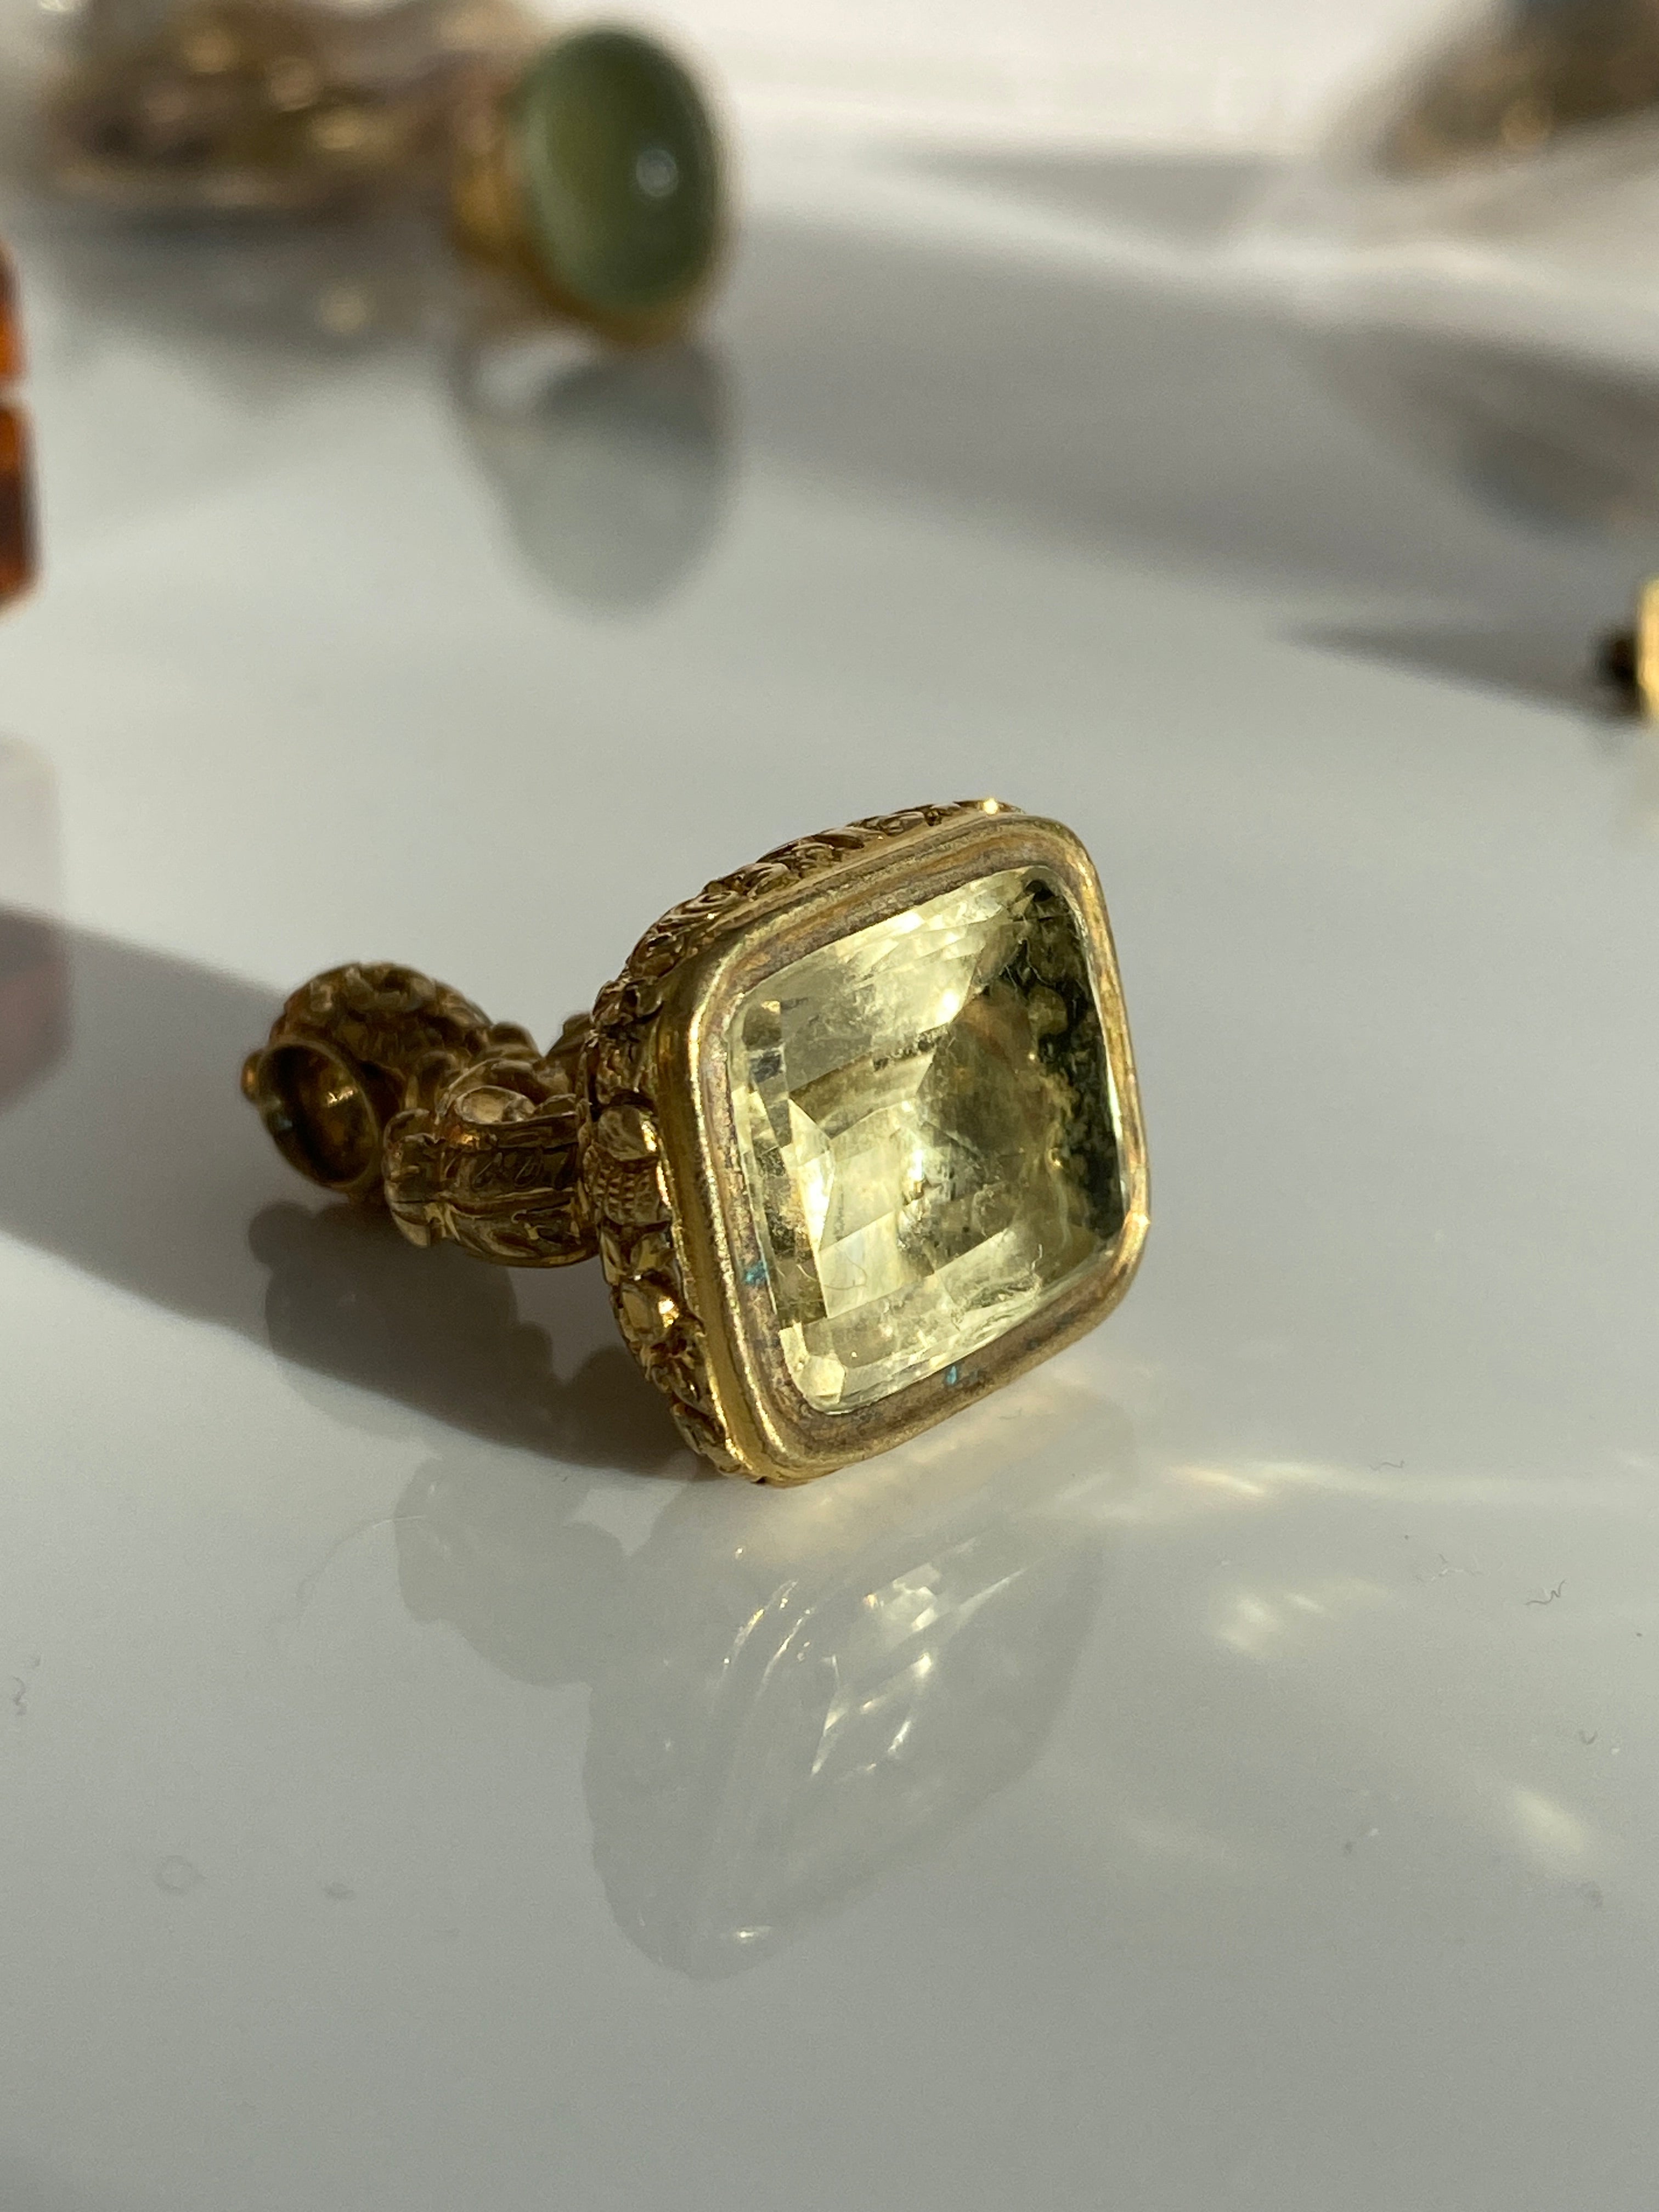 Antique Victorian Gold Cased Citrine Seal or Fob